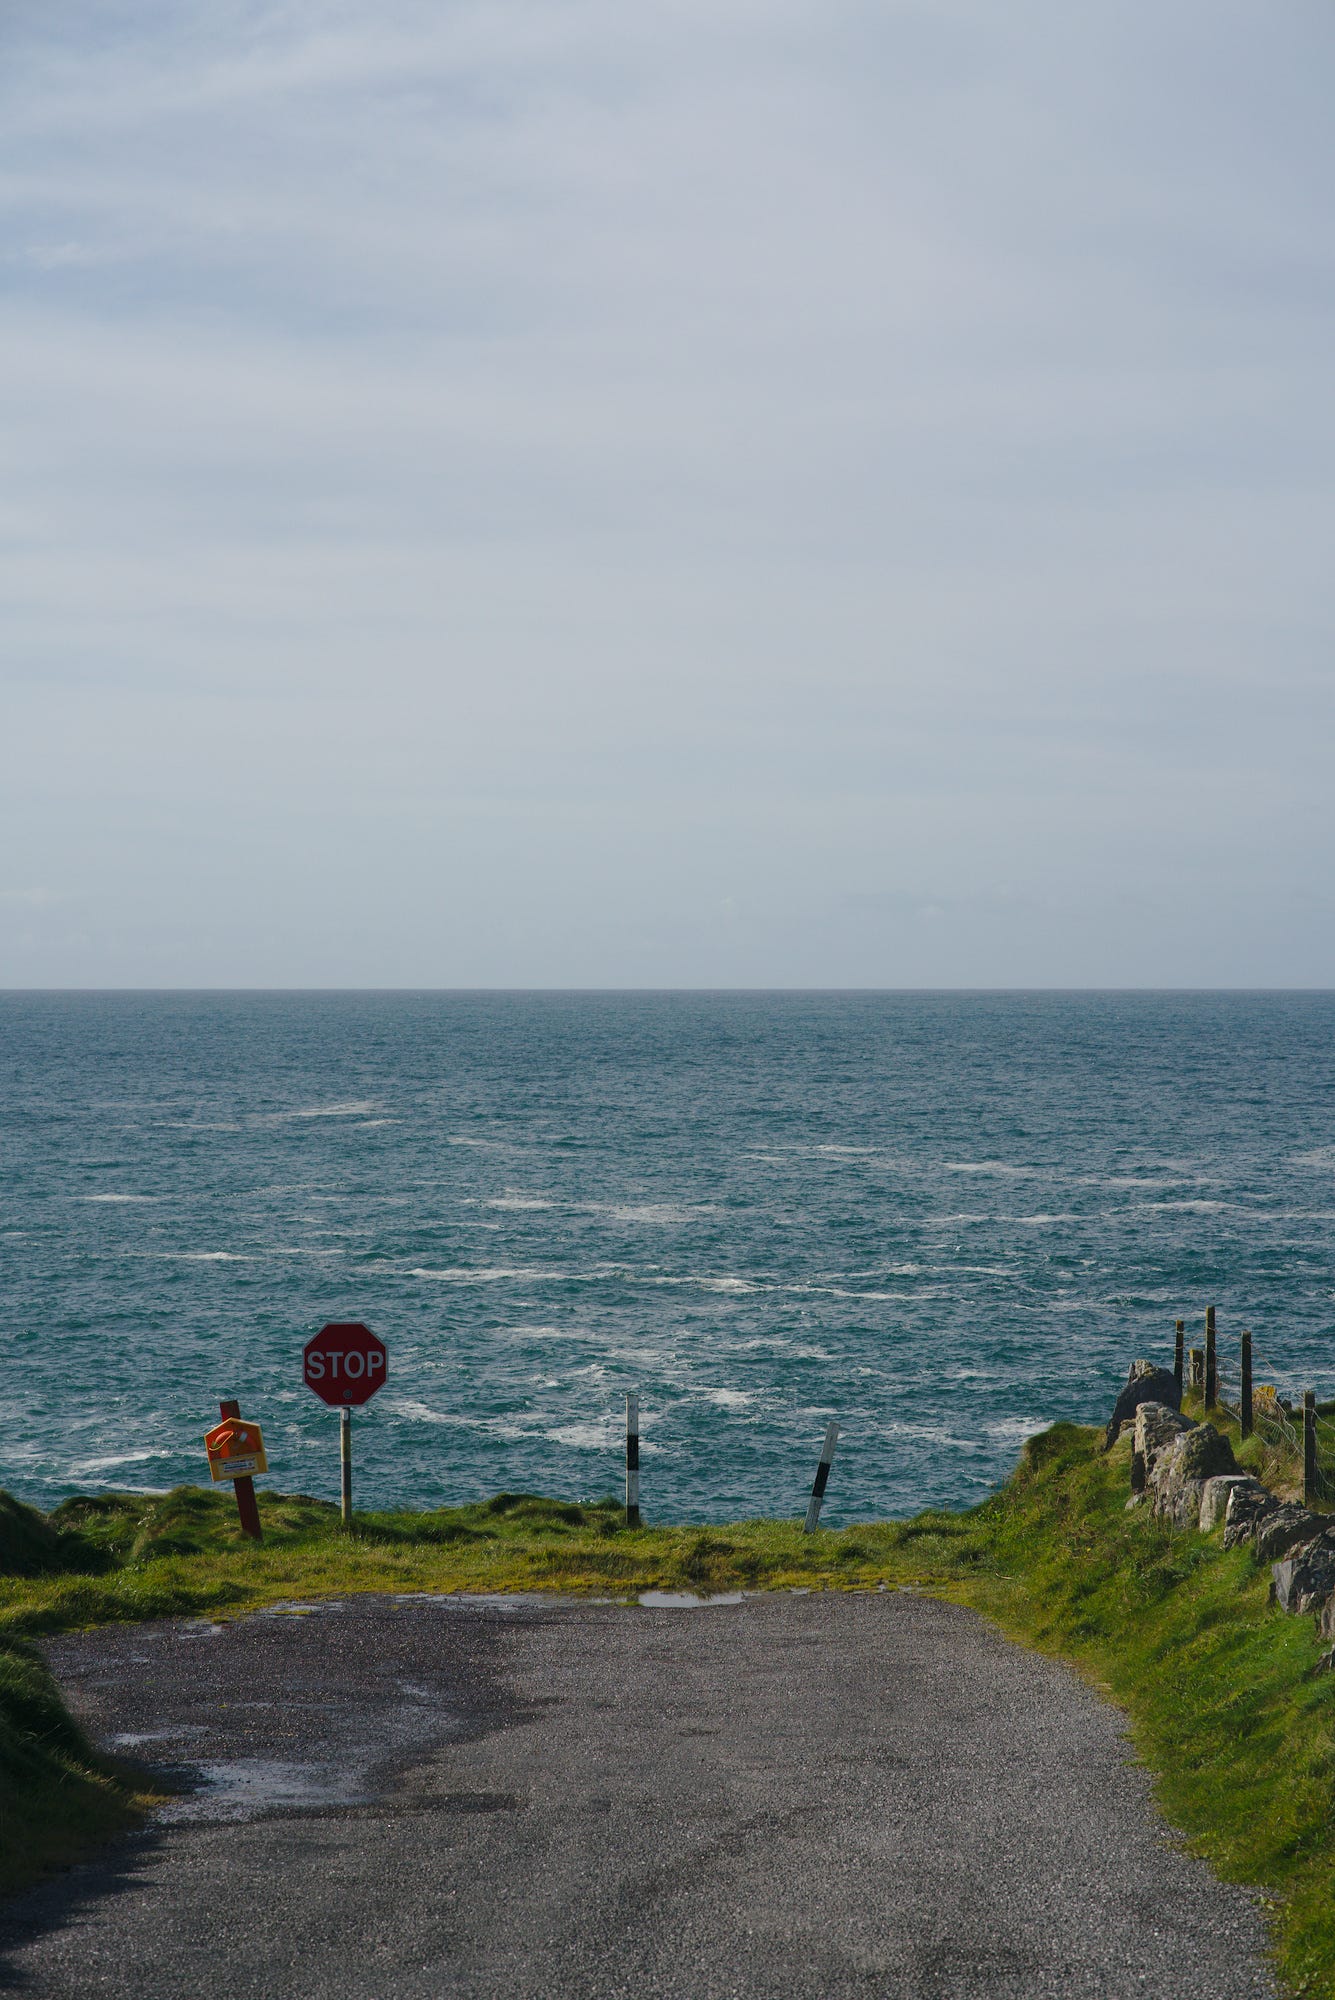 A stop sign that is the only thing stopping cars from plunging into the Atlantic at the end of the Mizen Peninsula in west Cork, Ireland. A suitable feeling metaphor for modern times.